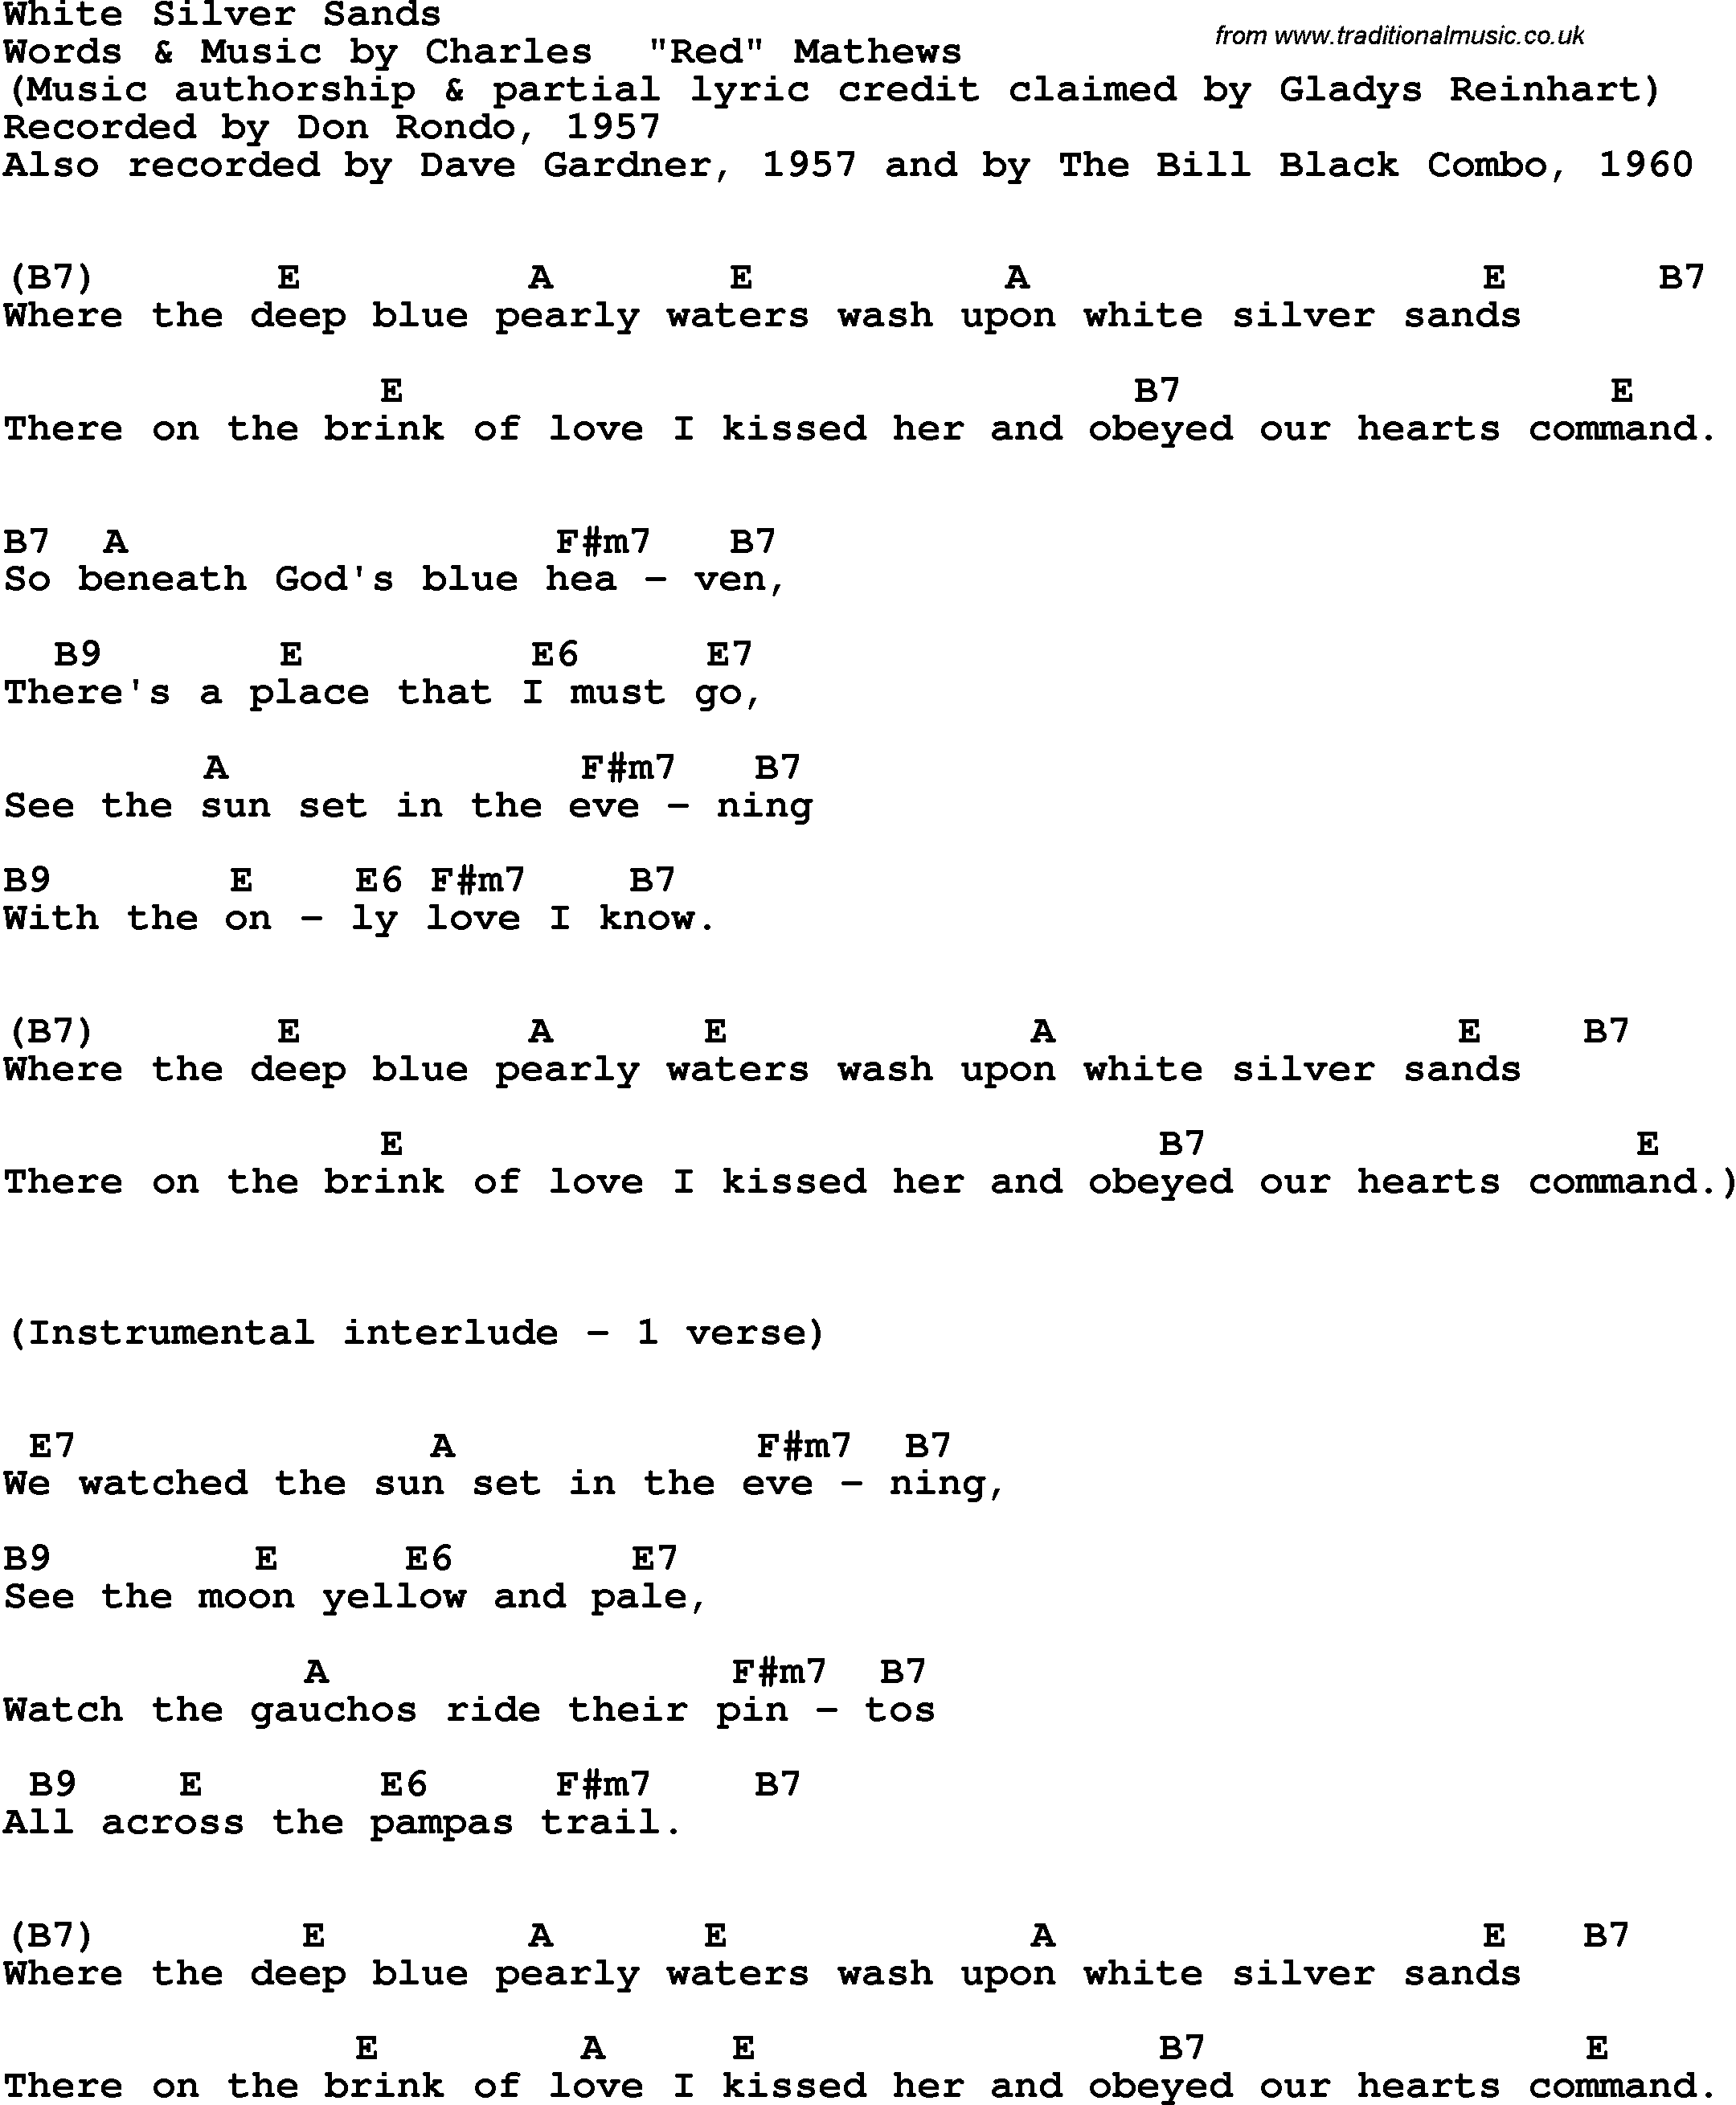 Song Lyrics with guitar chords for White Silver Sands - Don Rondo, 1957